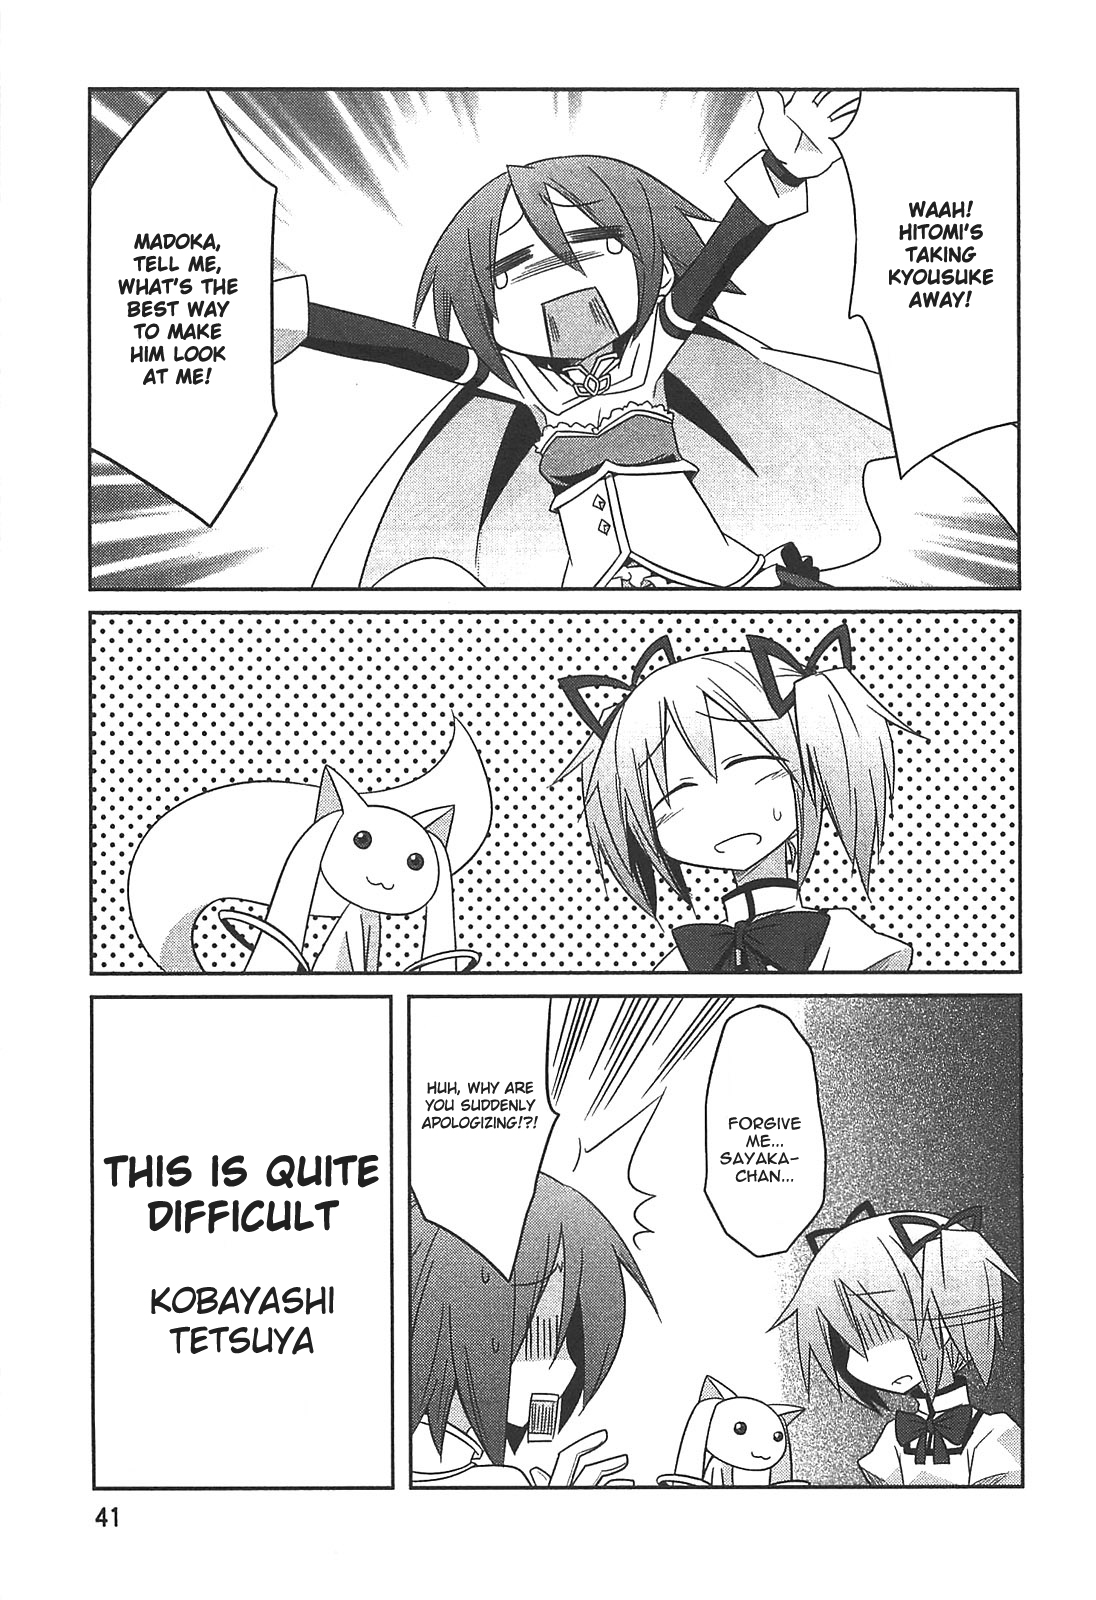 Puella Magi Madoka Magica Comic Anthology Vol. 1 Ch. 6 This is Quite Difficult